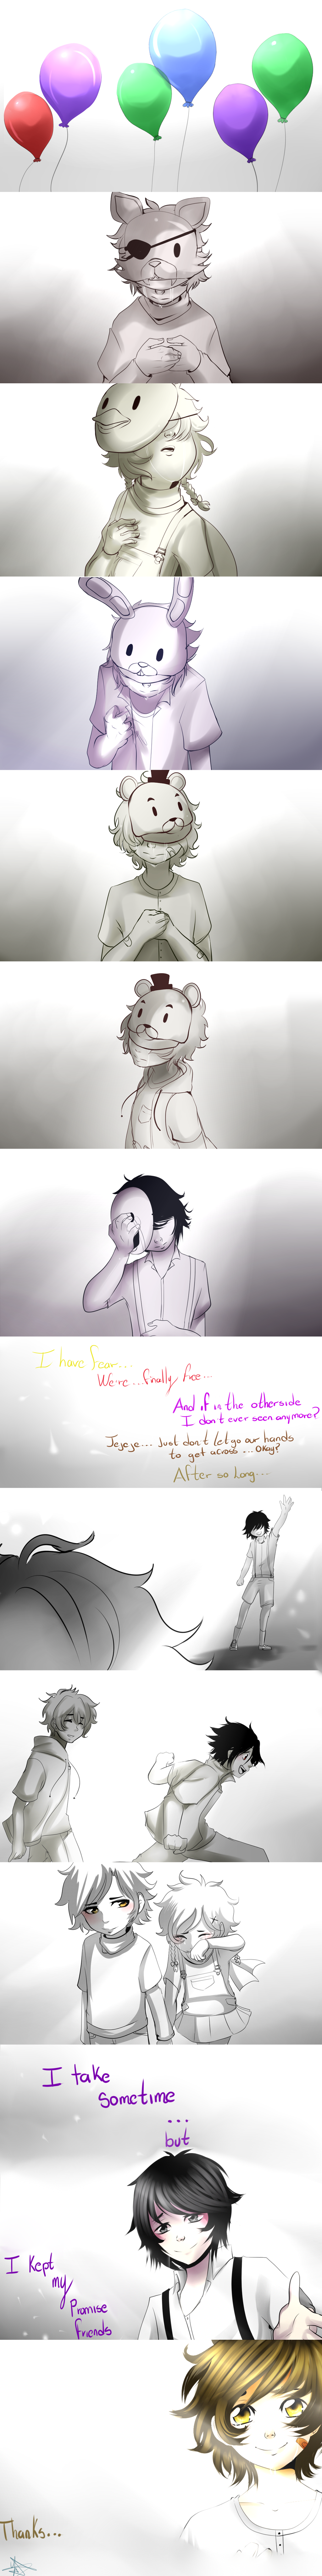 sadness and... by Kamik91